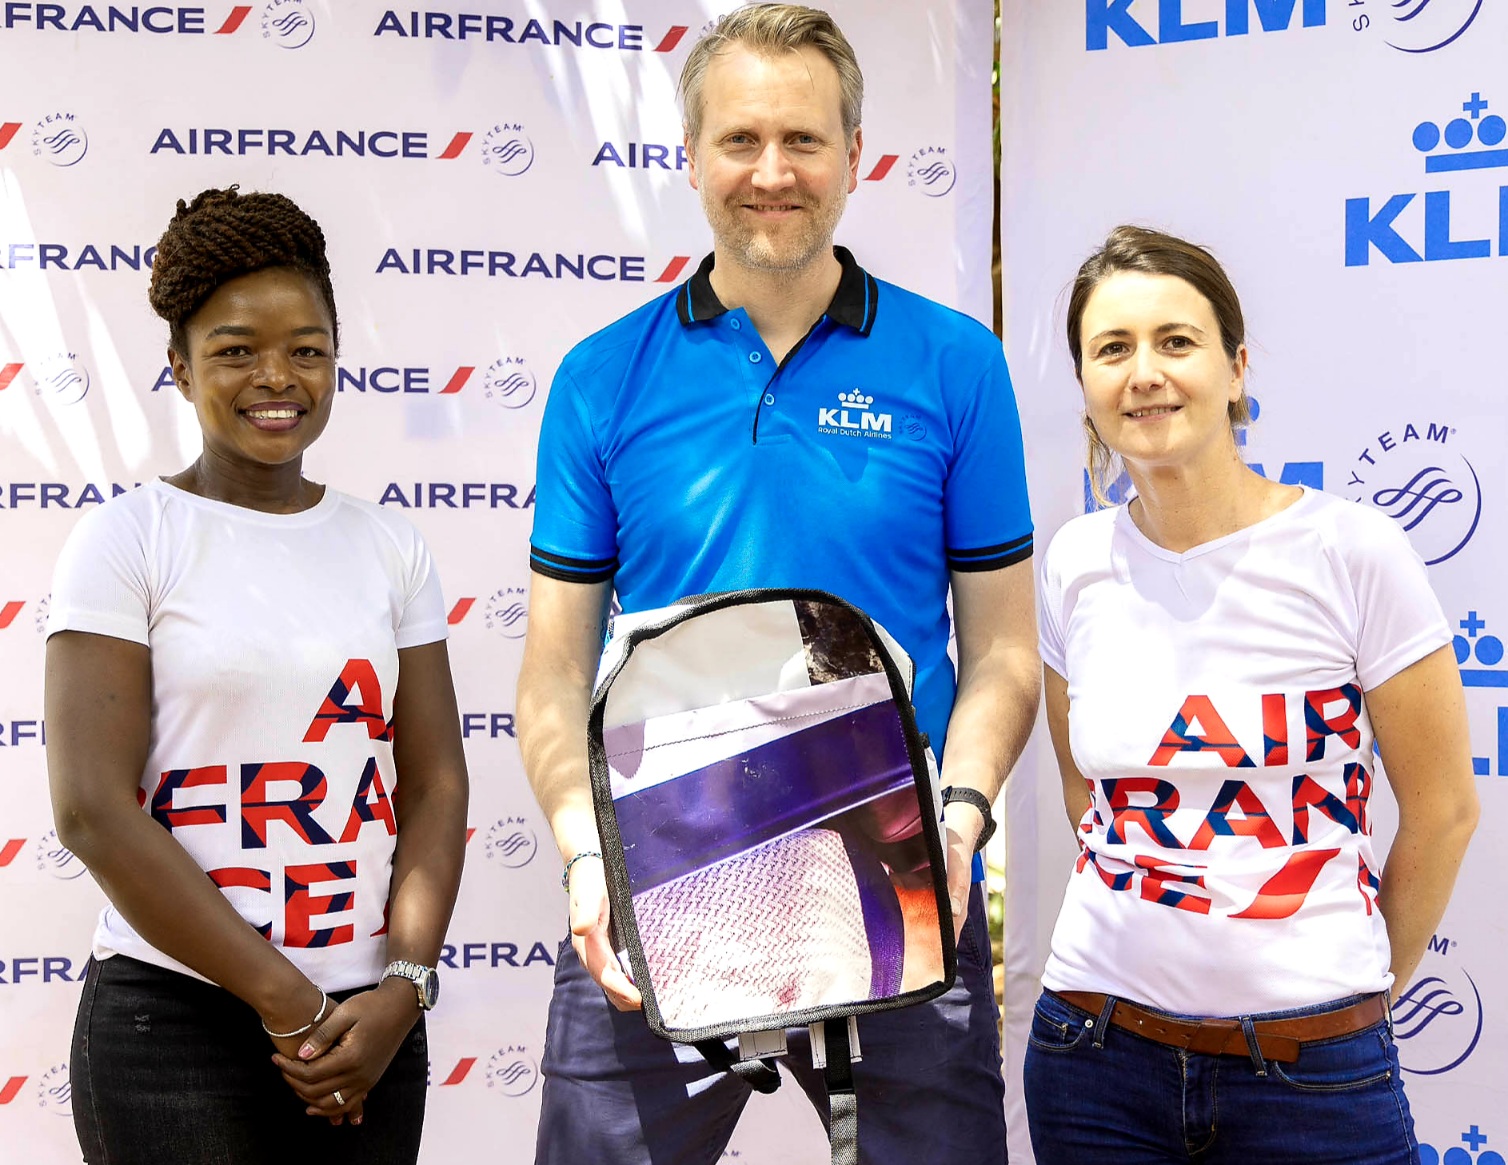 Centre, Air France – KLM Regional General Manager for East and Southern Africa, Marius van der Ham, poses for a photo holding one of the eco-friendly bags made from repurposed billboards and banners with Hildabeta Amiani, Air France - KLM Country Sales Manager for Kenya & Offline Markets (left) and Stephanie Spelle, Air France – KLM Regional Commercial Director for East and Southern Africa (right) after a successful donation of the said bags to Muthangari Primary School.